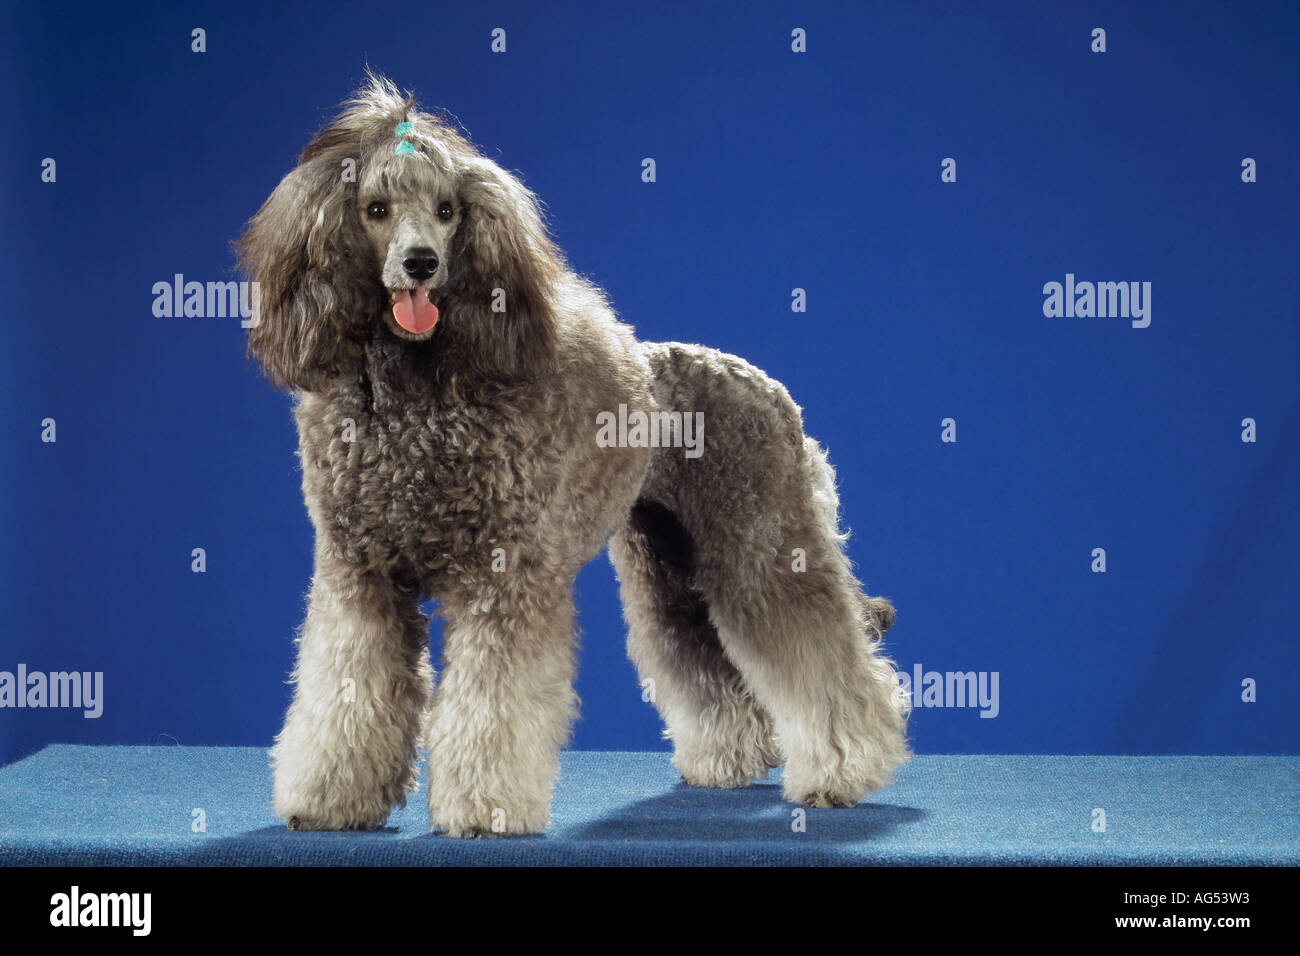 Grey Standard Poodle High Resolution Stock Photography and Images - Alamy